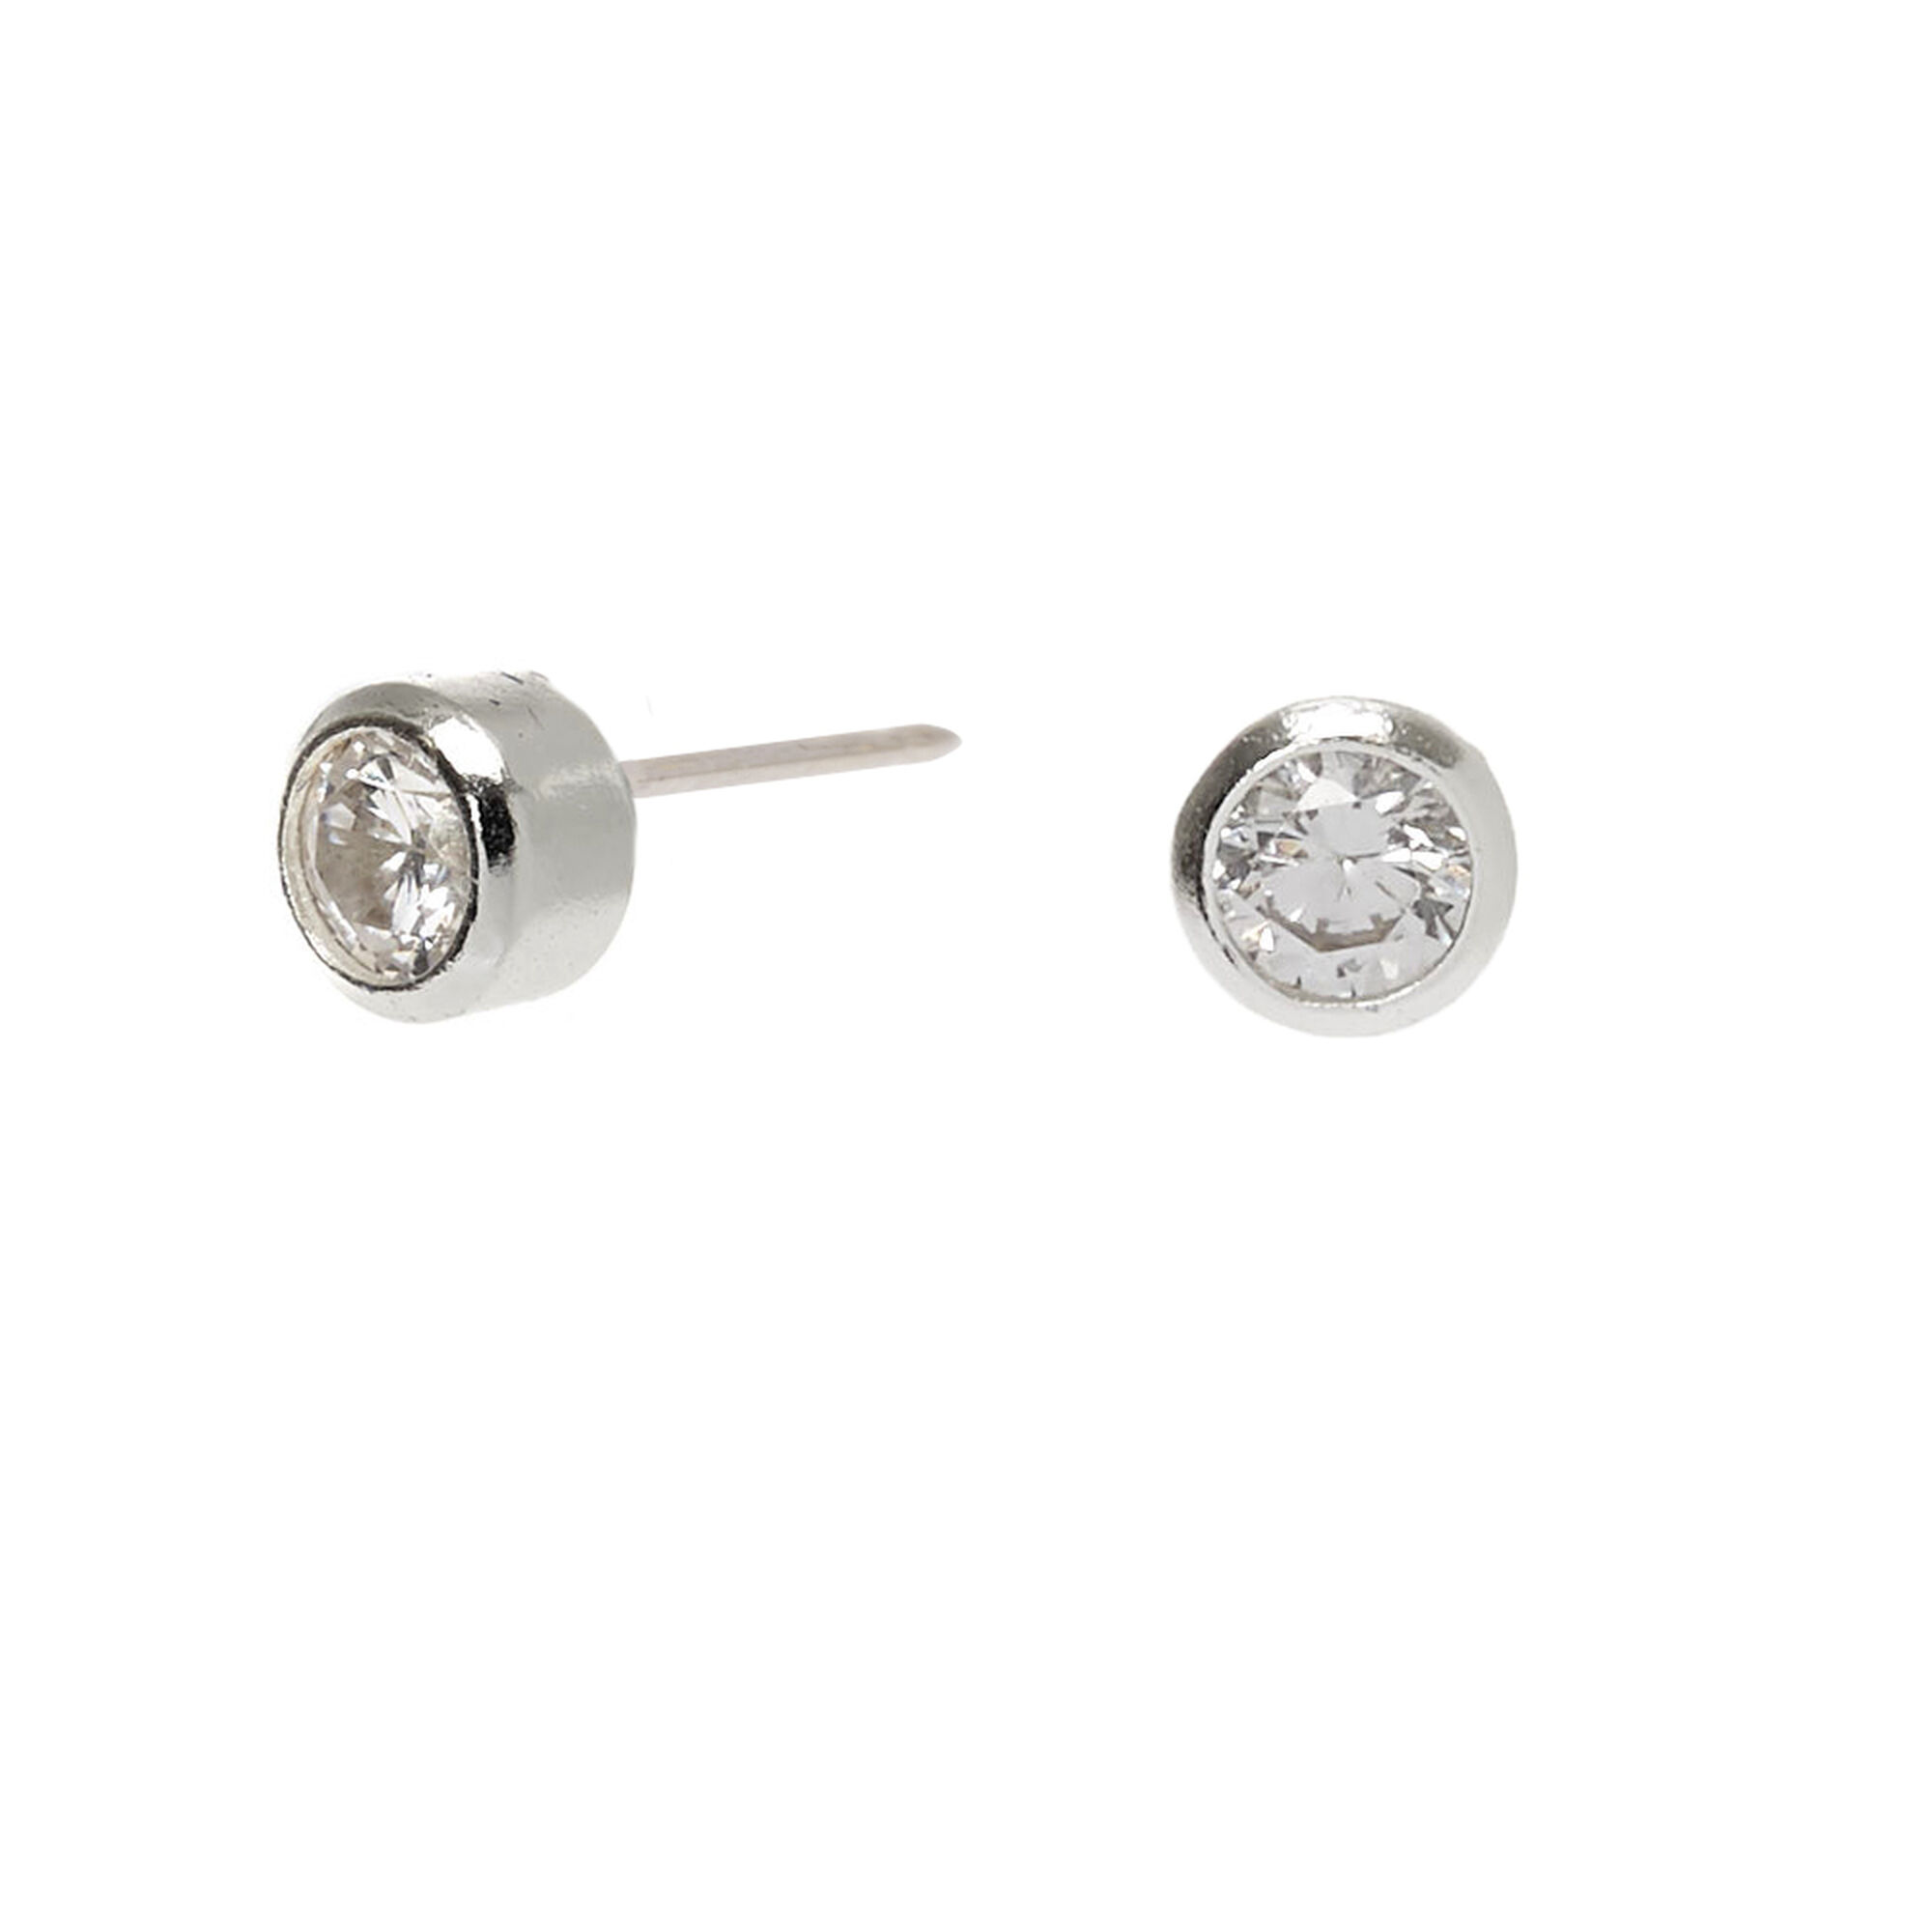 View Claires Cubic Zirconia 3MM Round Bezel Stud Earrings Silver information